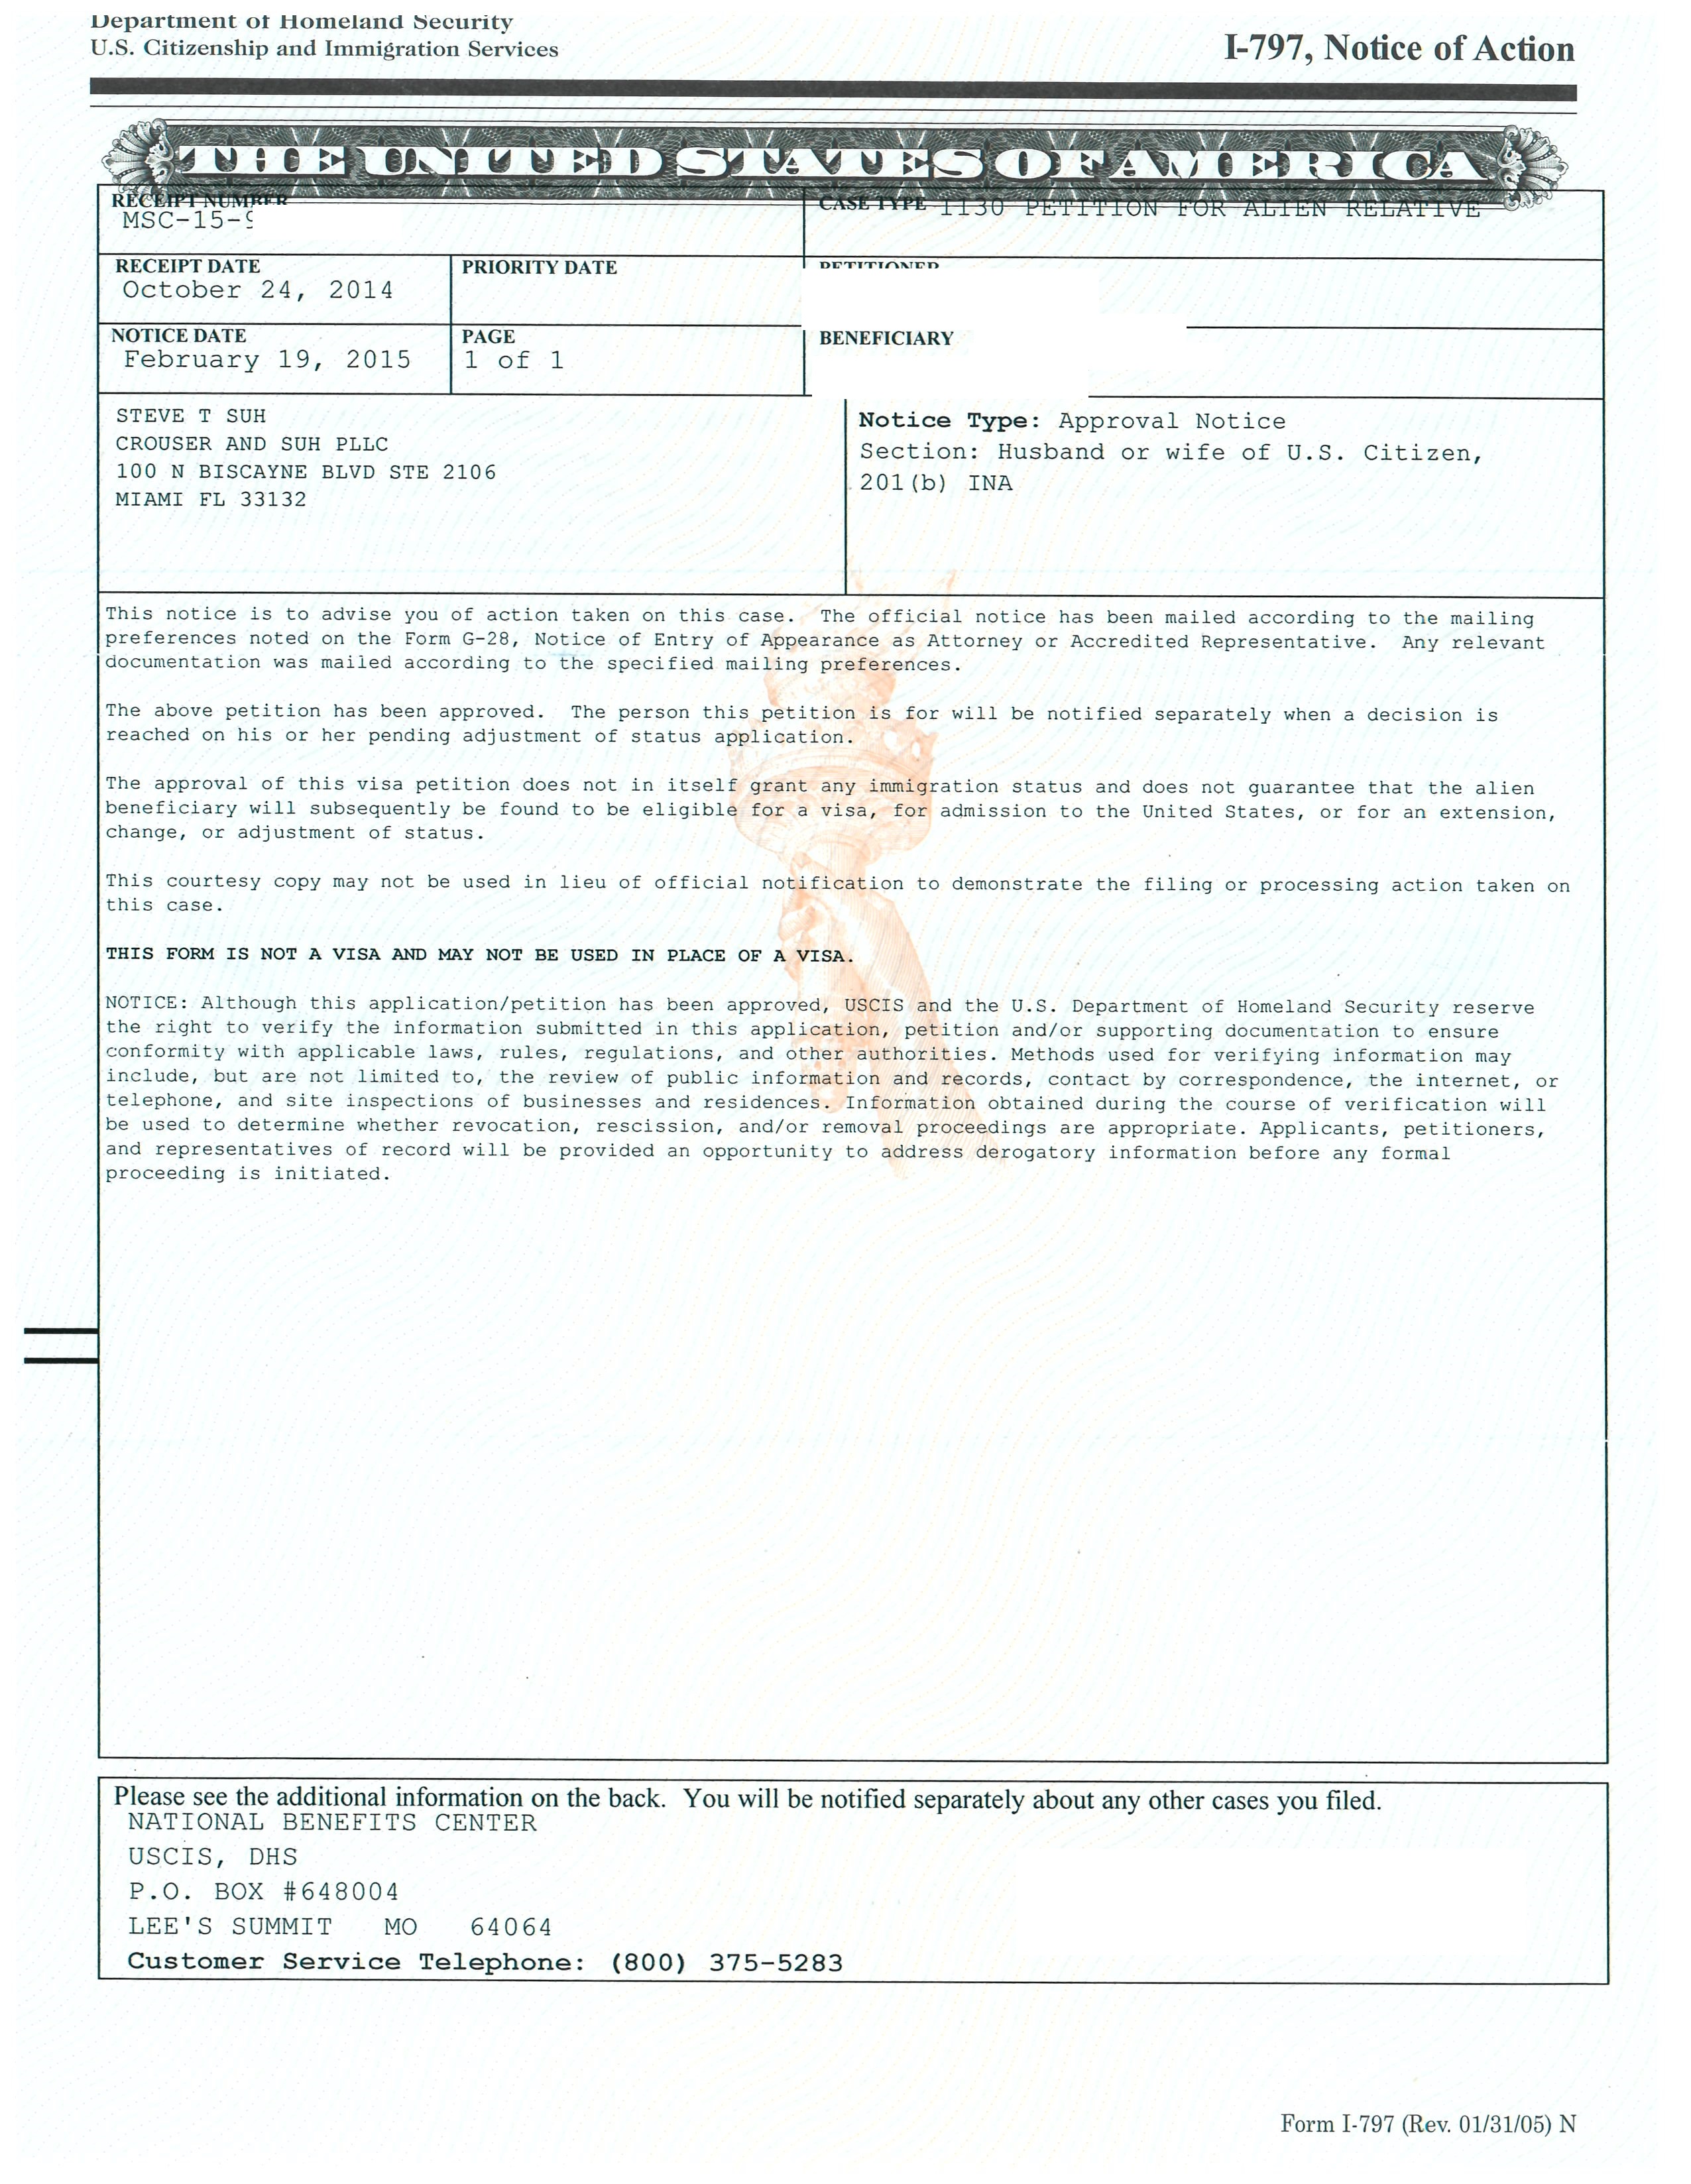 marriagepetitionapprovalnotice02192015(2).jpg